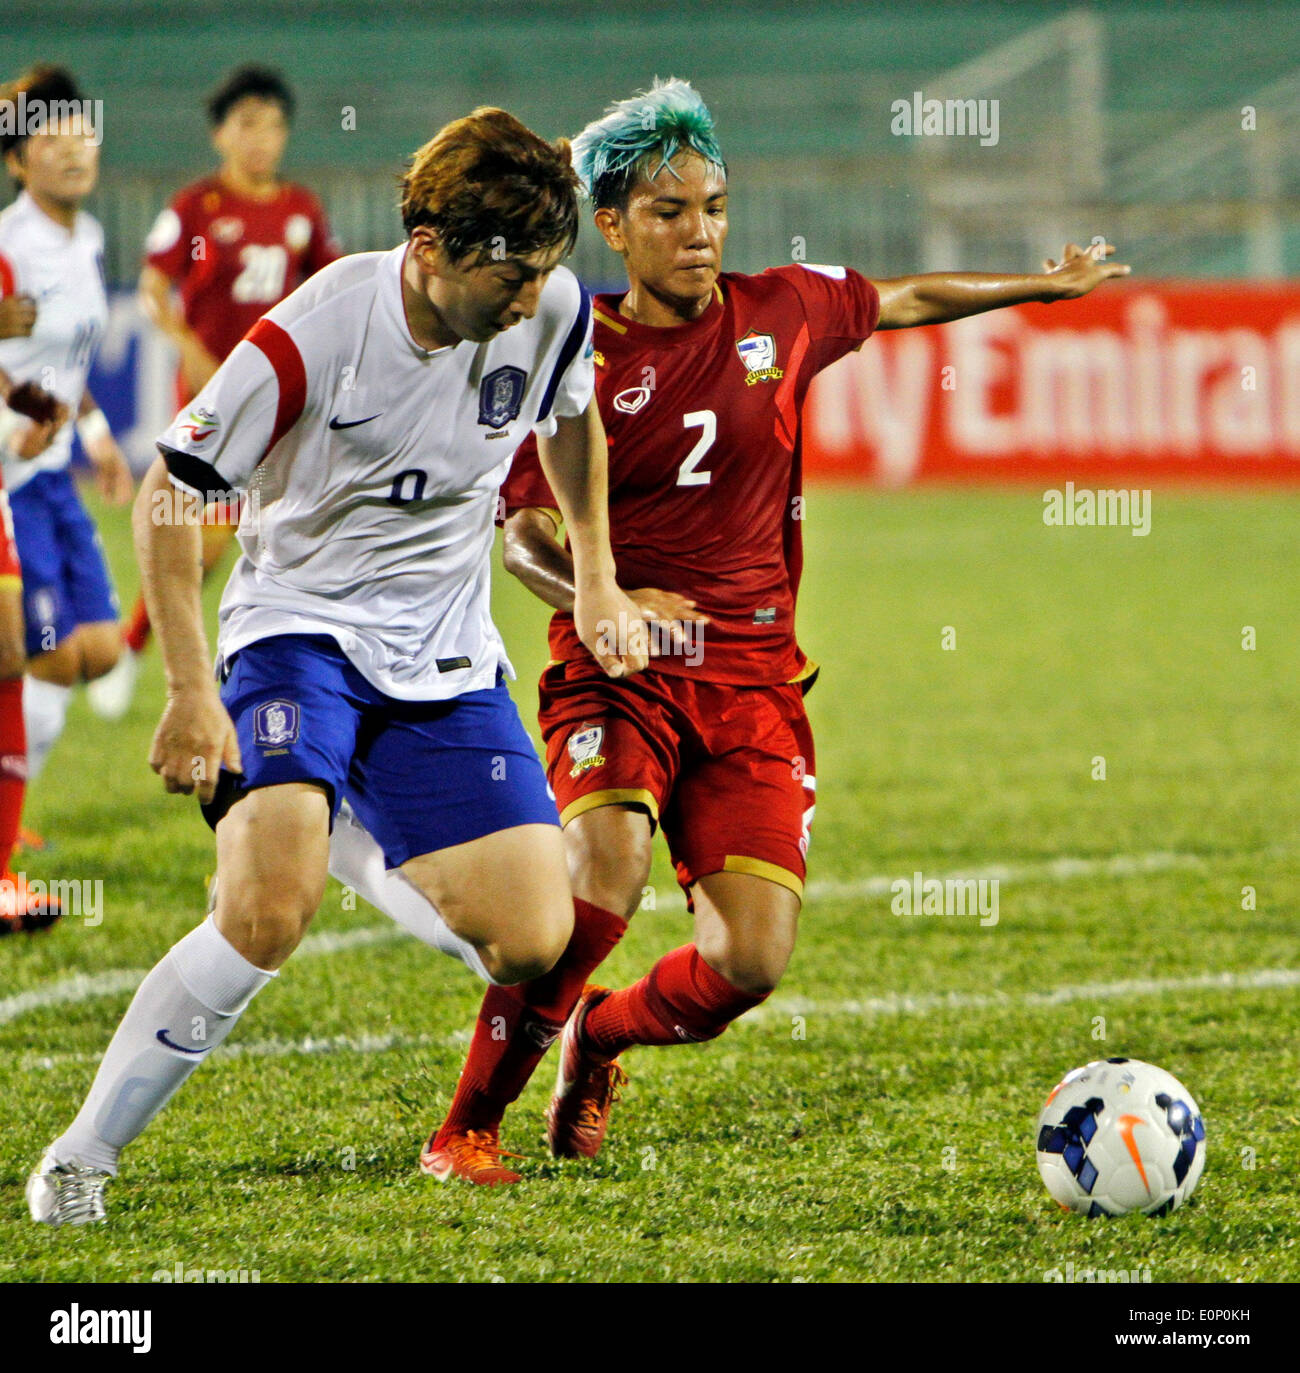 Ho Chi Minh, Vietnam. 17th May, 2014. Park Eun Sun (L) of South Korea vies for the ball during the Group B match against Thailand at the 2014 Women's AFC Cup held at Thong Nhat Stadium in Ho Chi Minh city, Vietnam, May 17, 2014. South Korea advance to World Cup after beating Thailand 4-0. Credit:  Nguyen Le Huyen/Xinhua/Alamy Live News Stock Photo